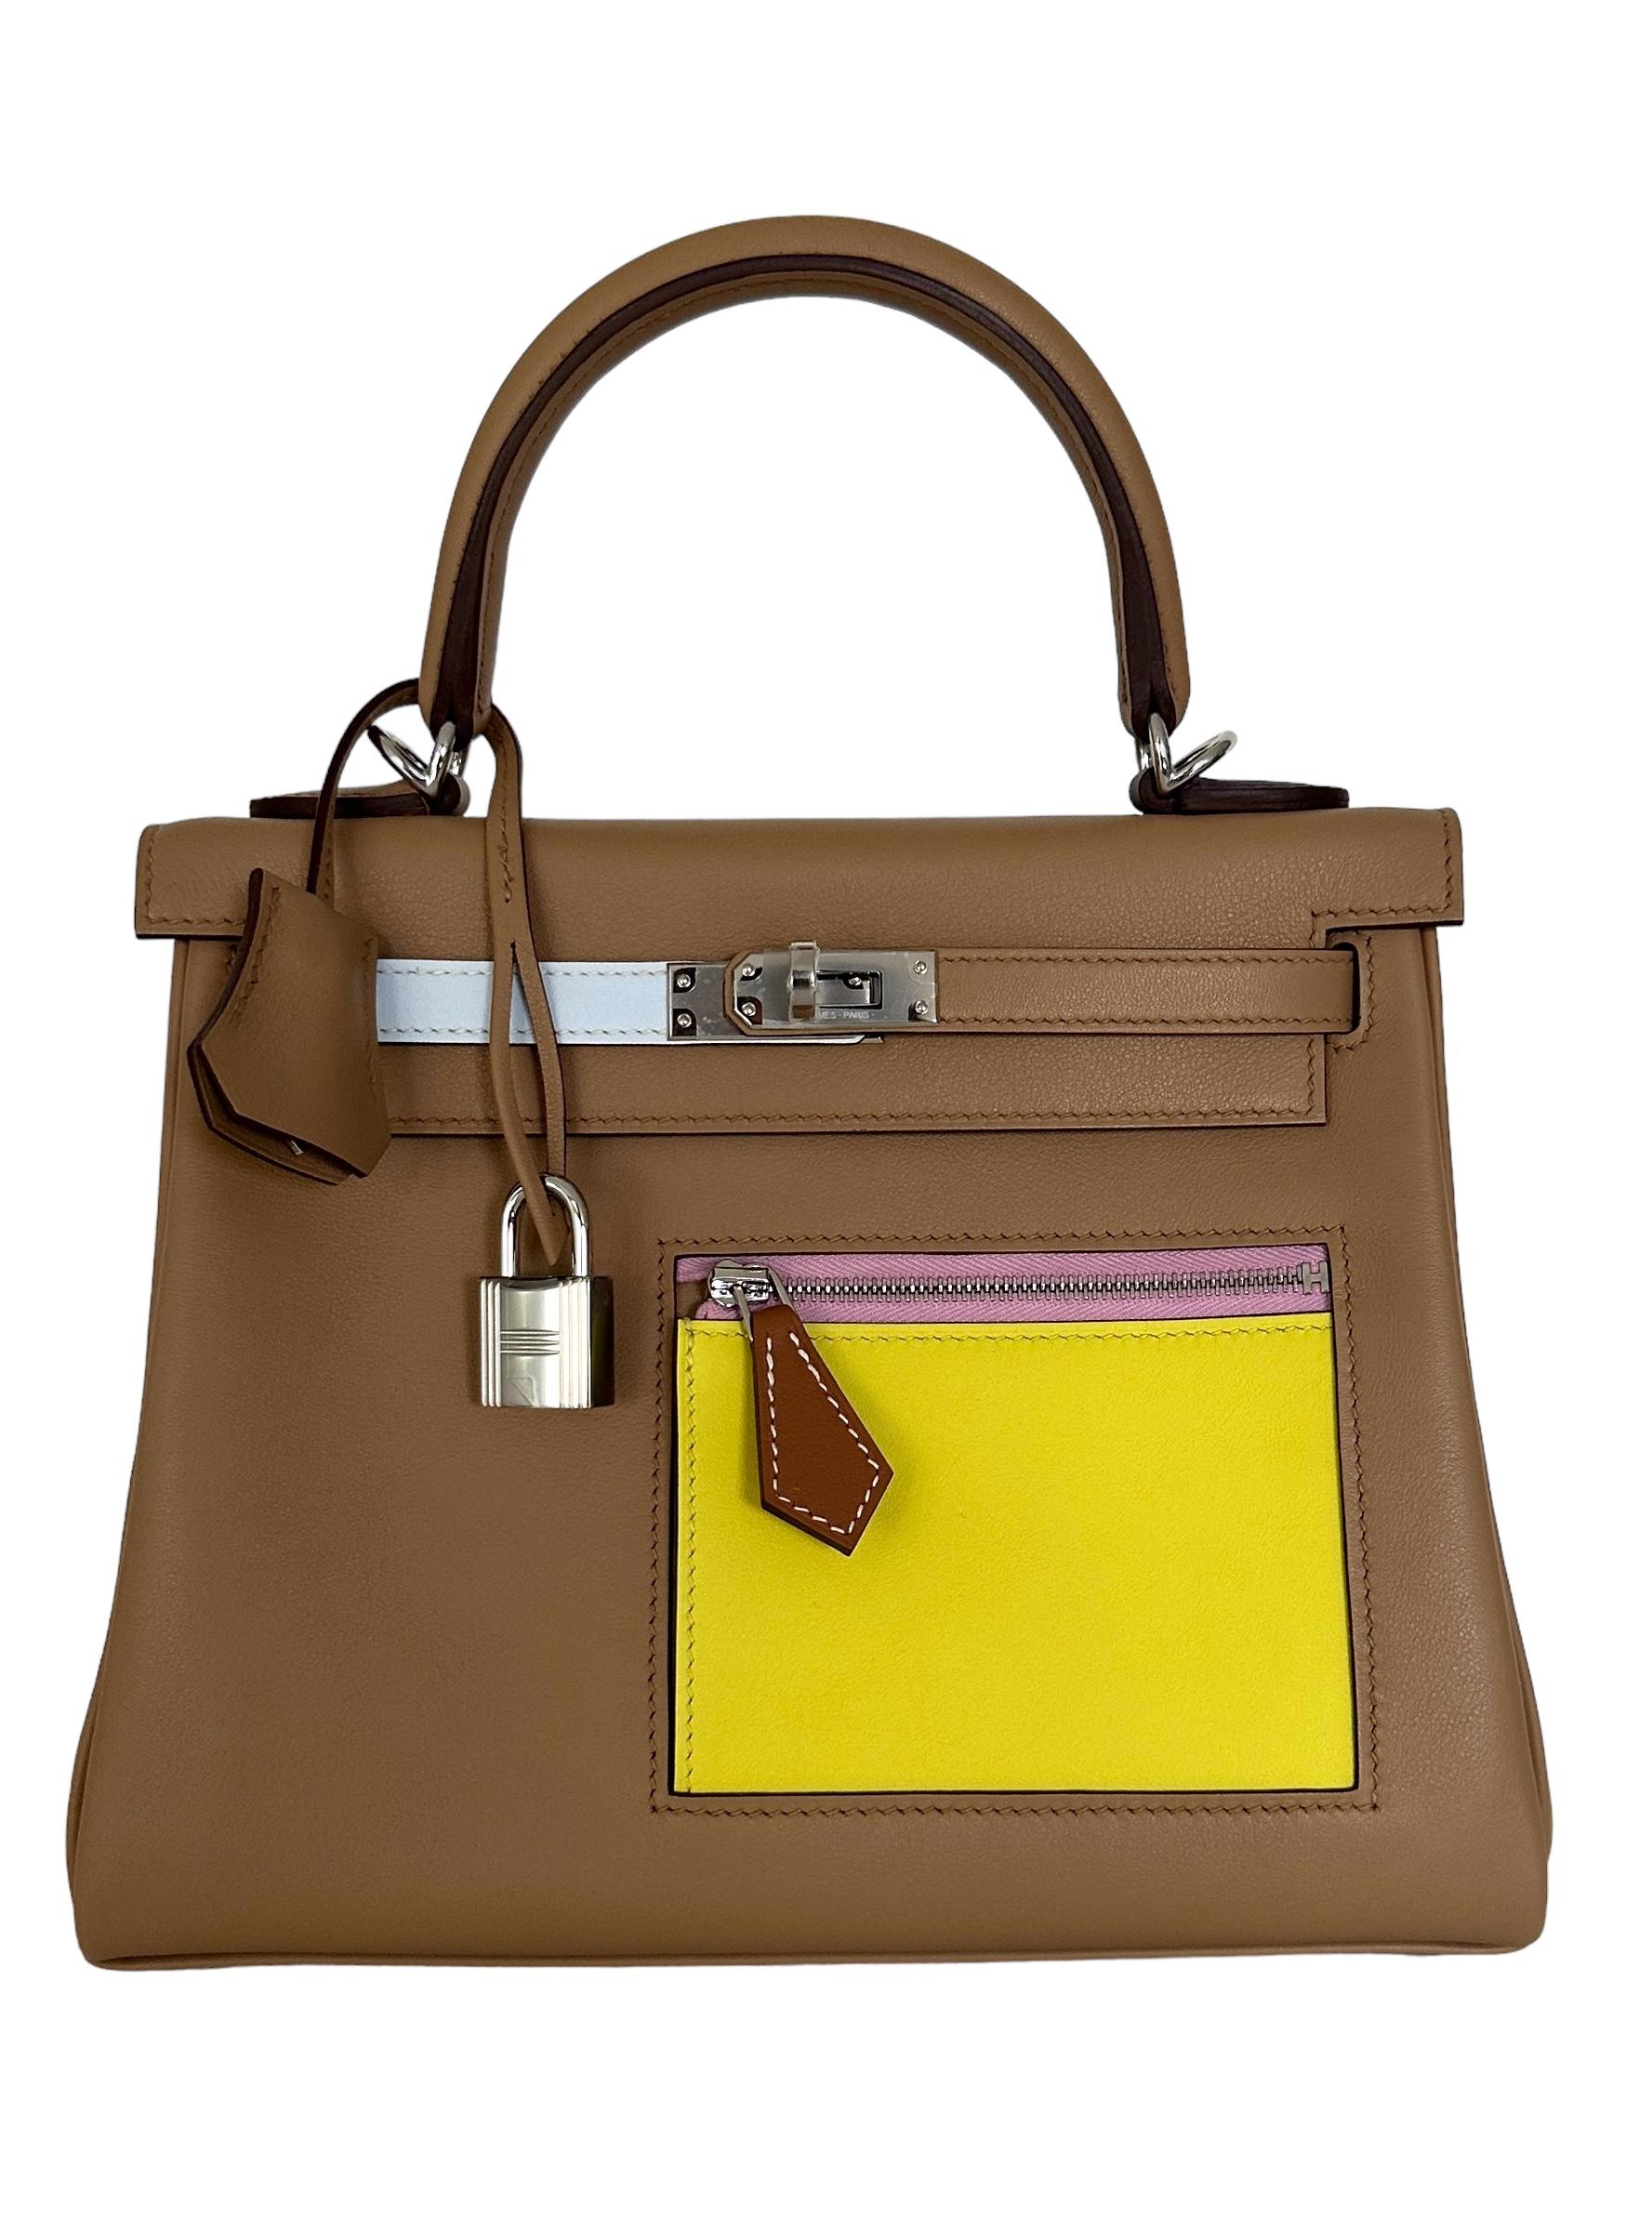 
Hermes Limited Edition Colormatic Kelly 25cm
The Hermes Kelly Colormatic is a limited edition collection of the iconic Hermes Kelly bag.
An Hermès Kelly Colormatic 25, beautifully handcrafted from Swift leather in Chai, Lime, Blue Brume, Cassis,